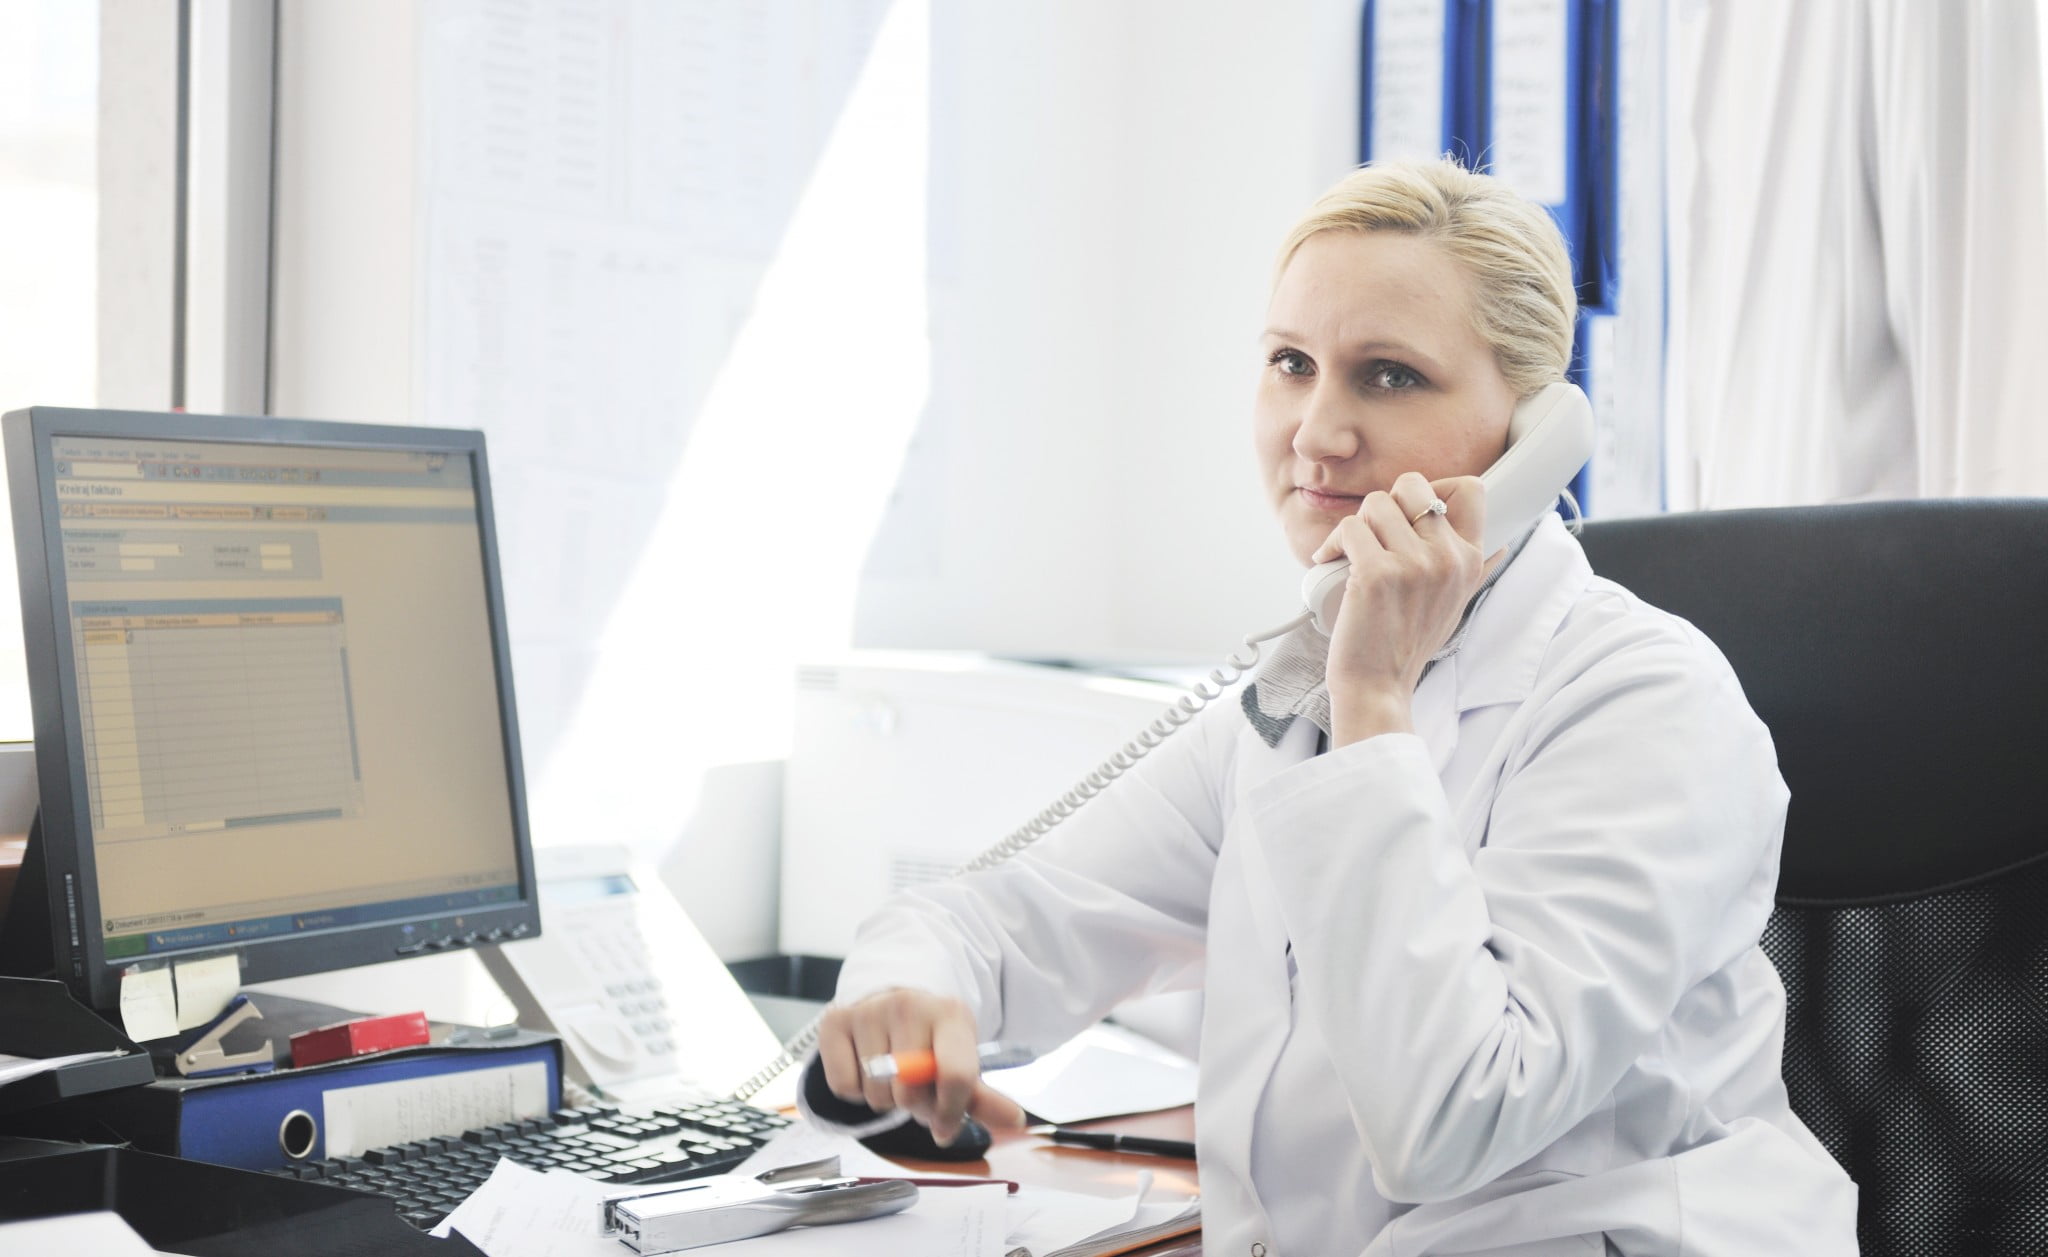 employee pharmacists: busy-looking pharmacist on hold on the phone